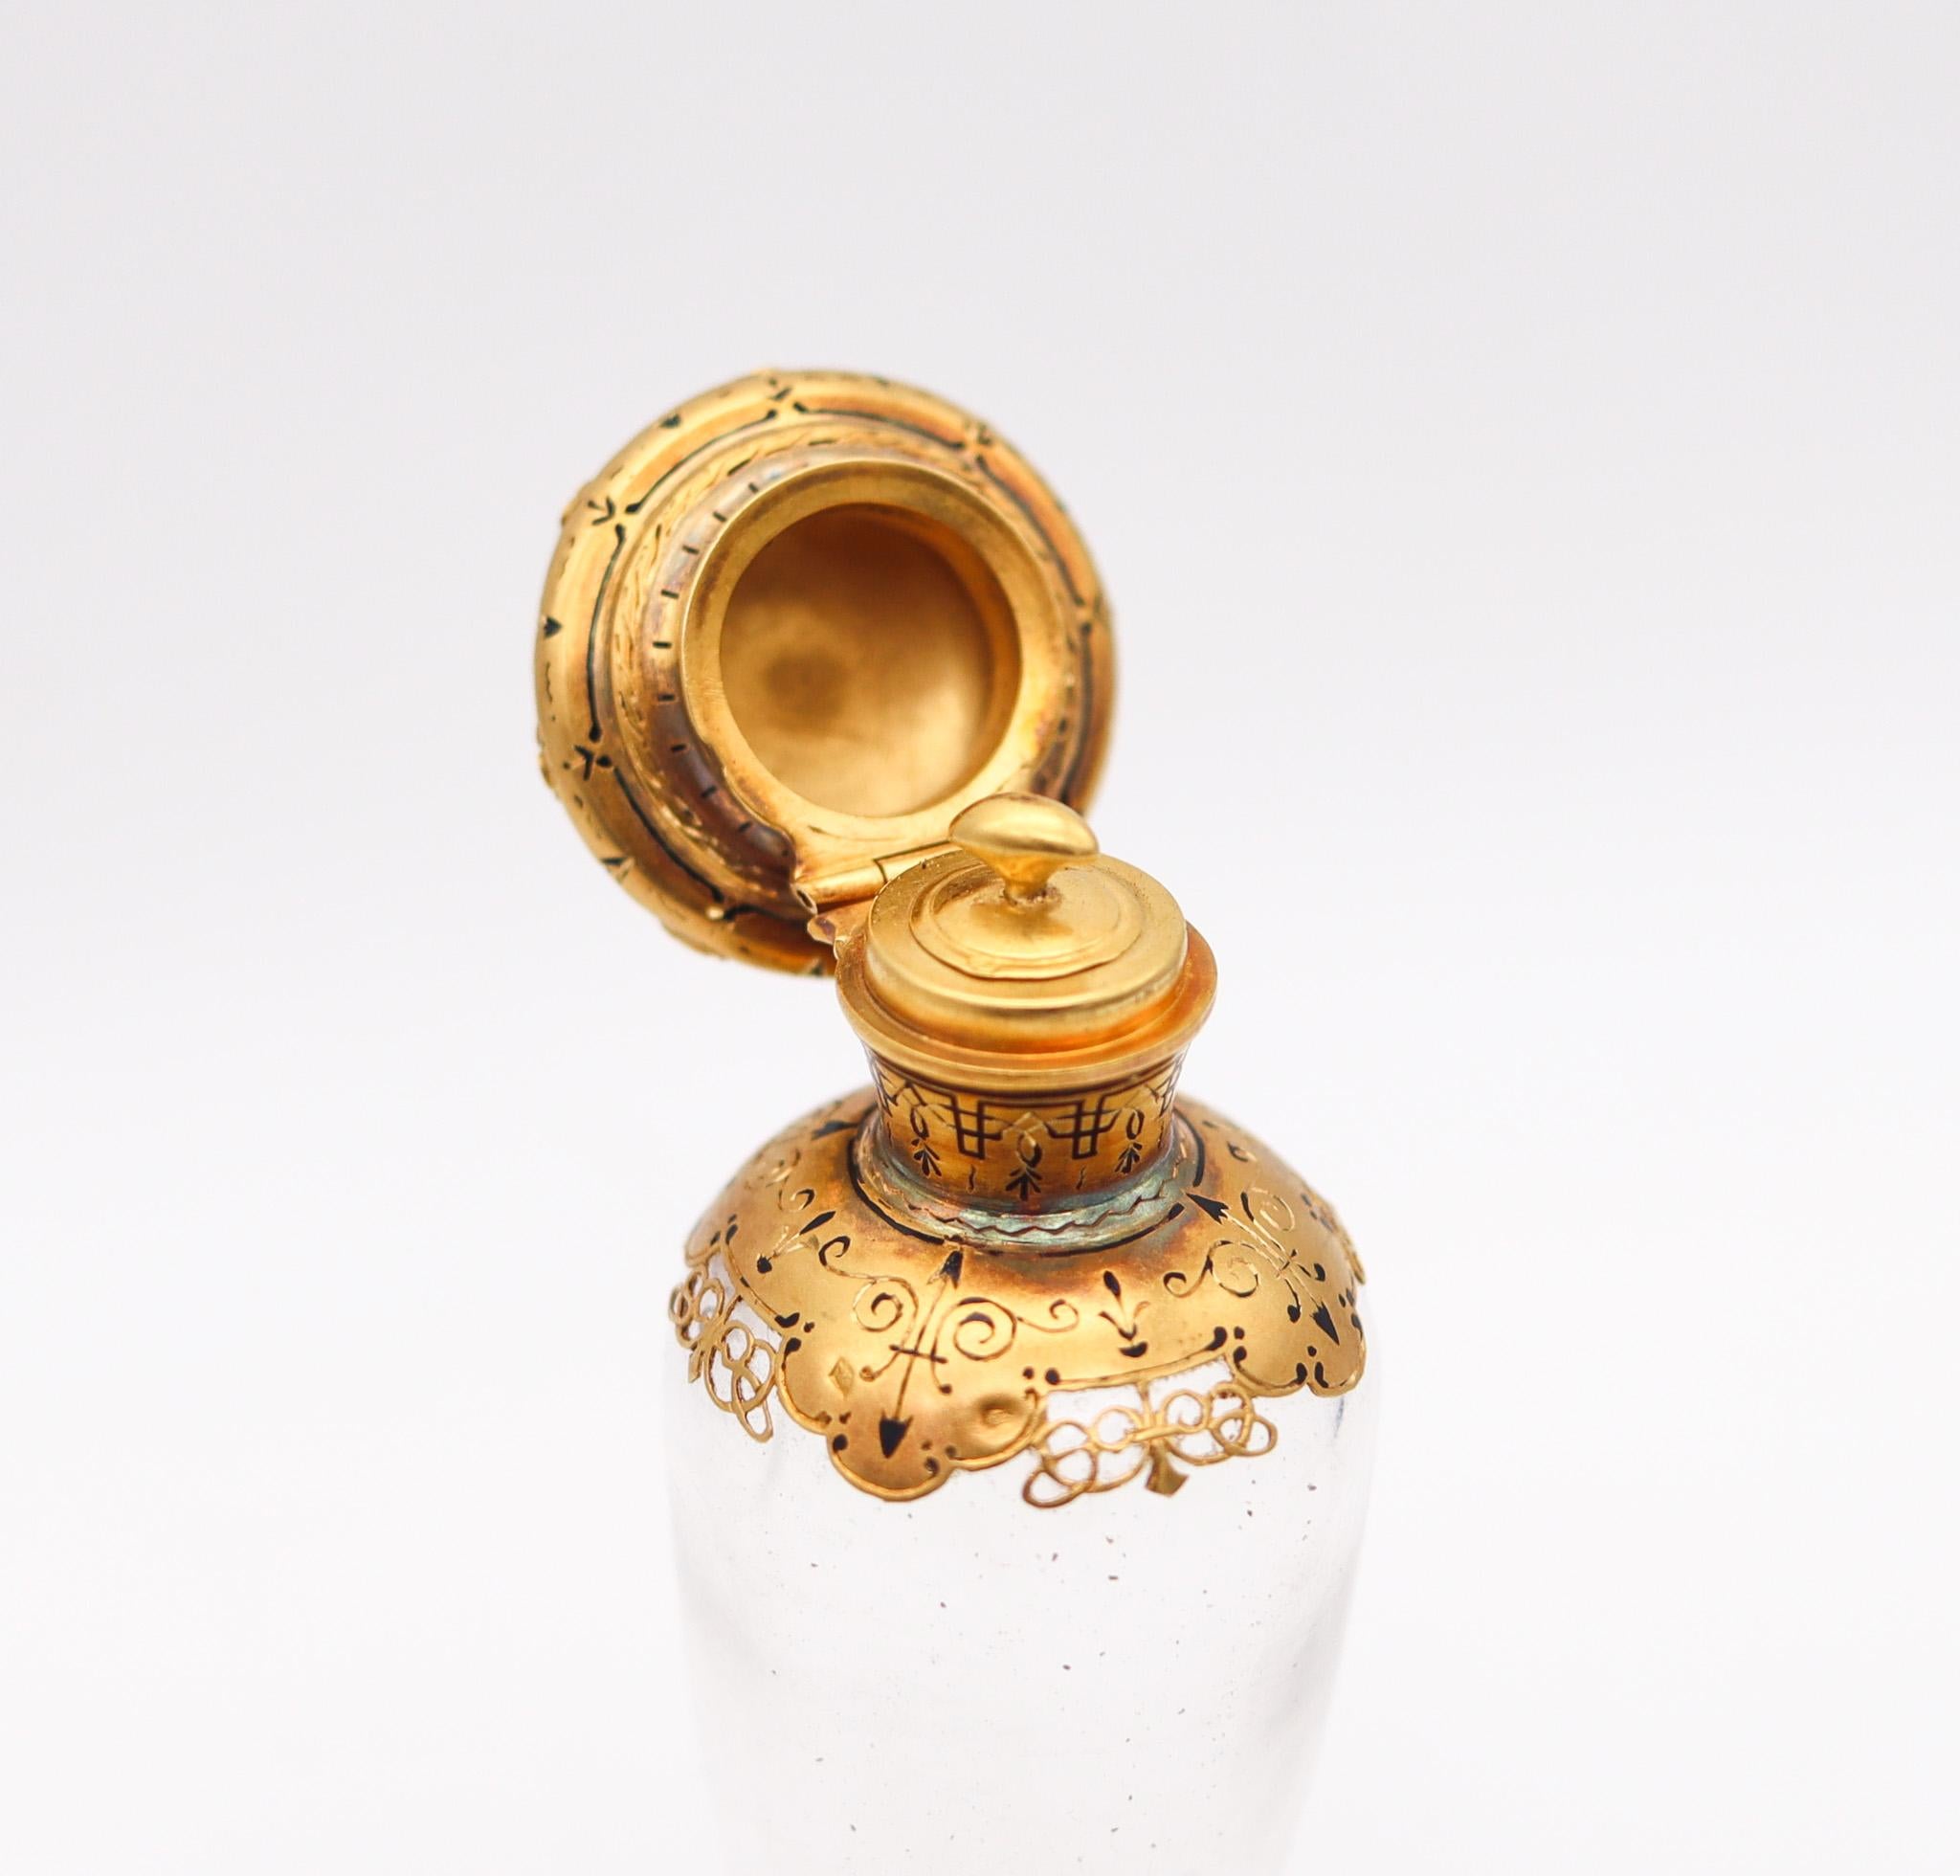 French 1870 Napoleon III Perfume Bottle Mount In 18Kt Yellow Gold With Gemstones For Sale 2